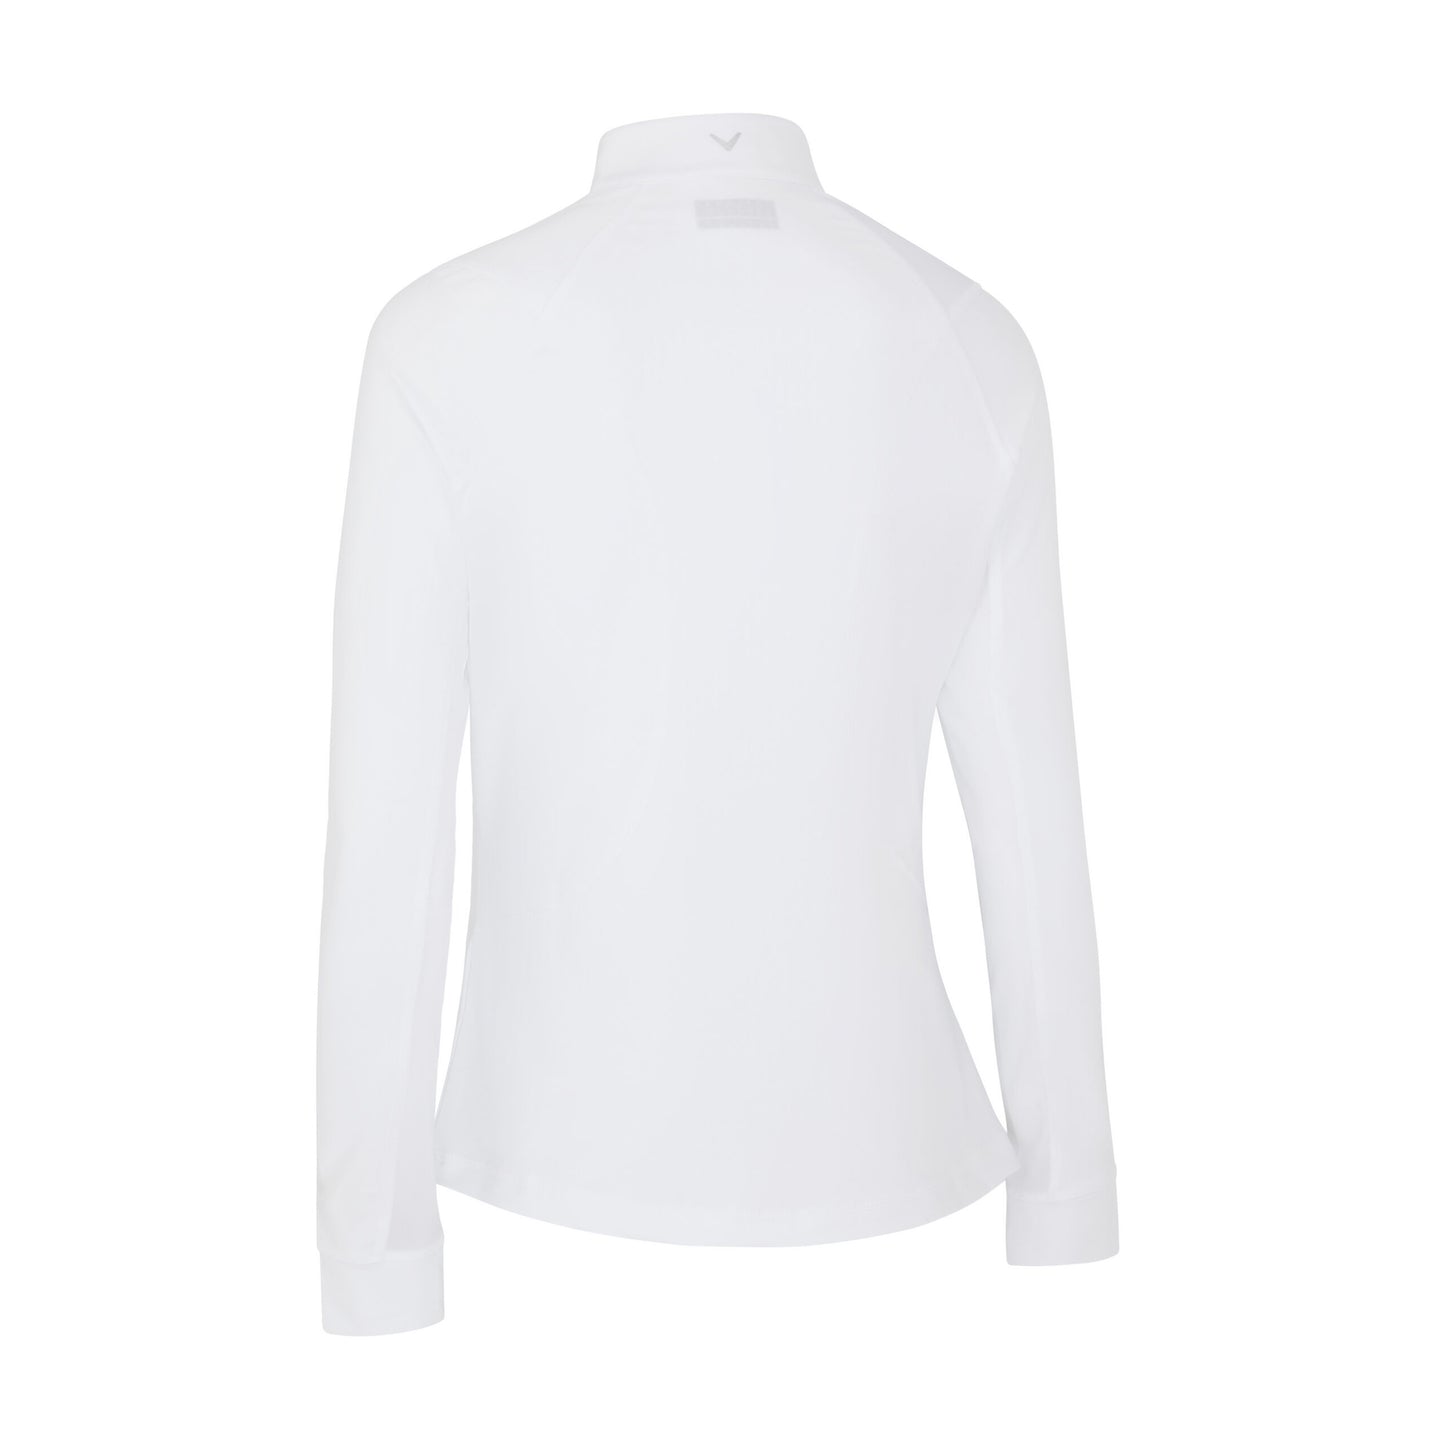 Callaway Ladies Sun Protection 1/4 Zip With Mesh Panels in BRILLIANT WHITE